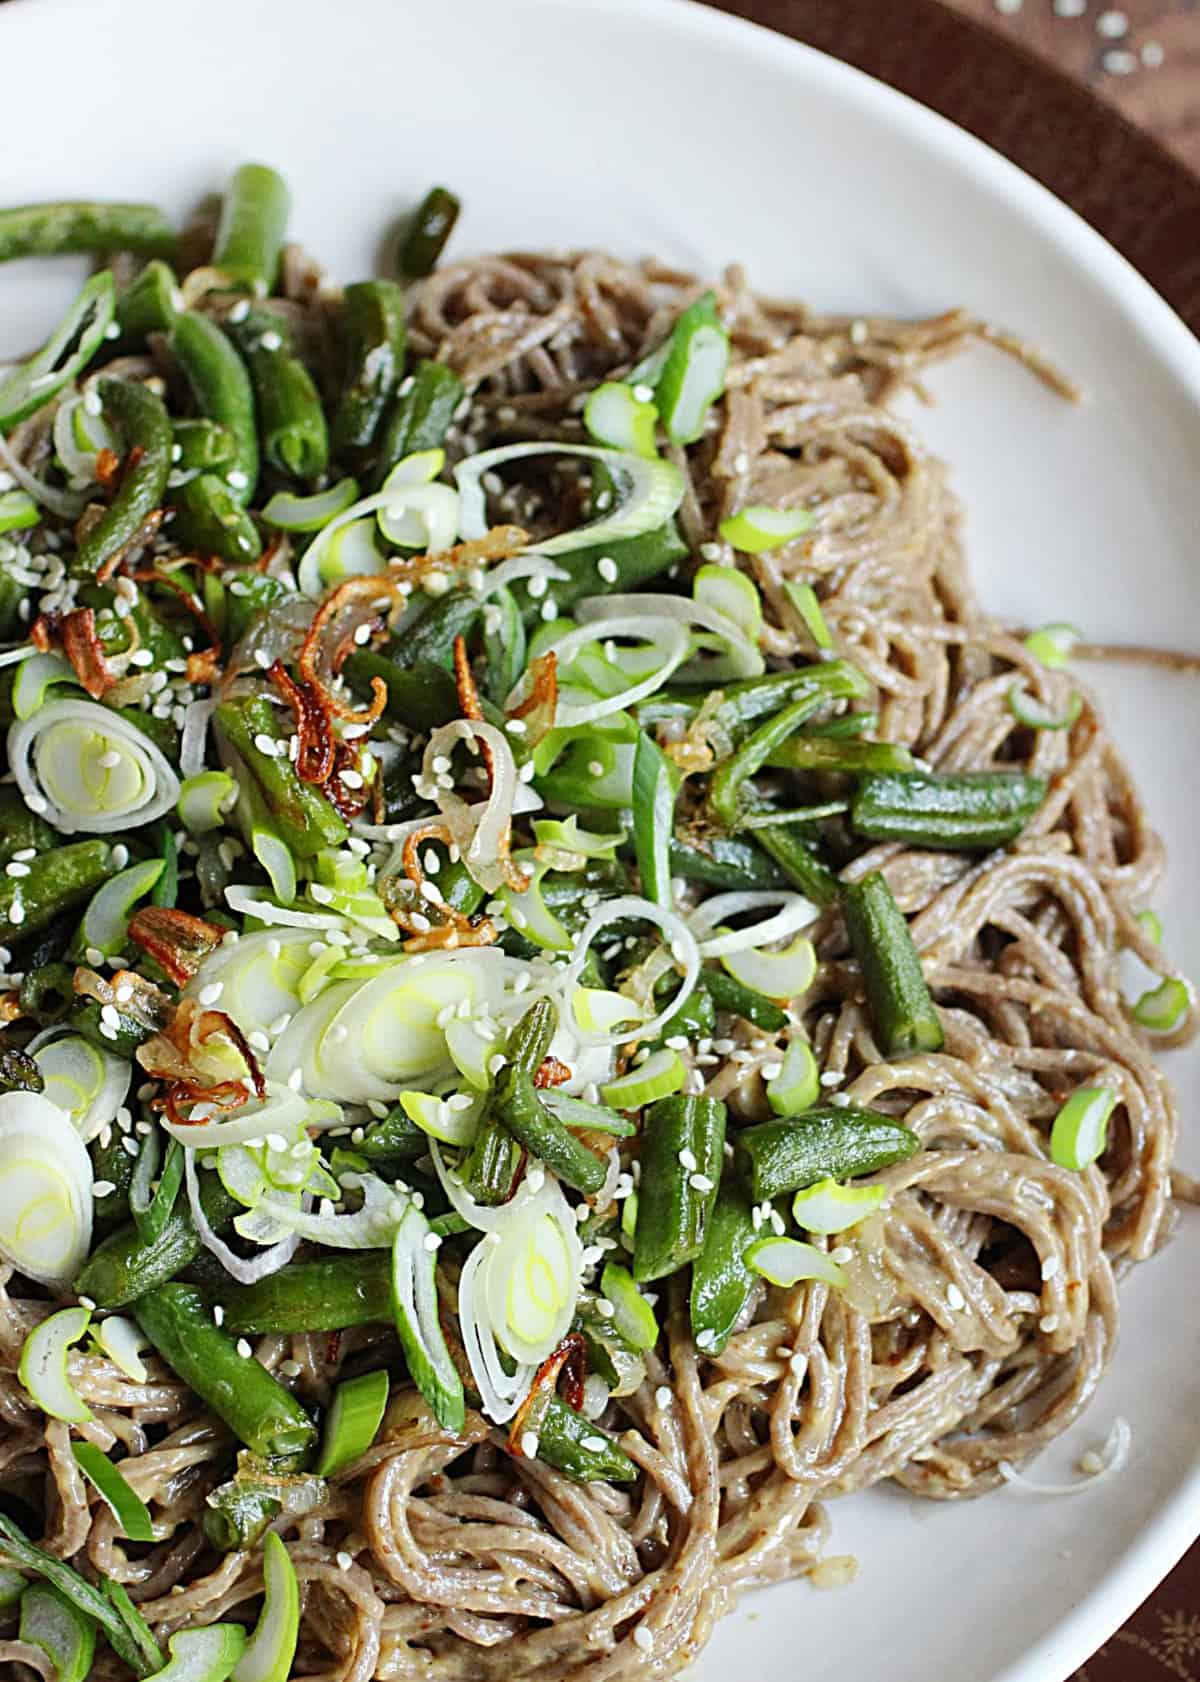 Soba noodle salad with green beans and shallots on white plate, close-up image.